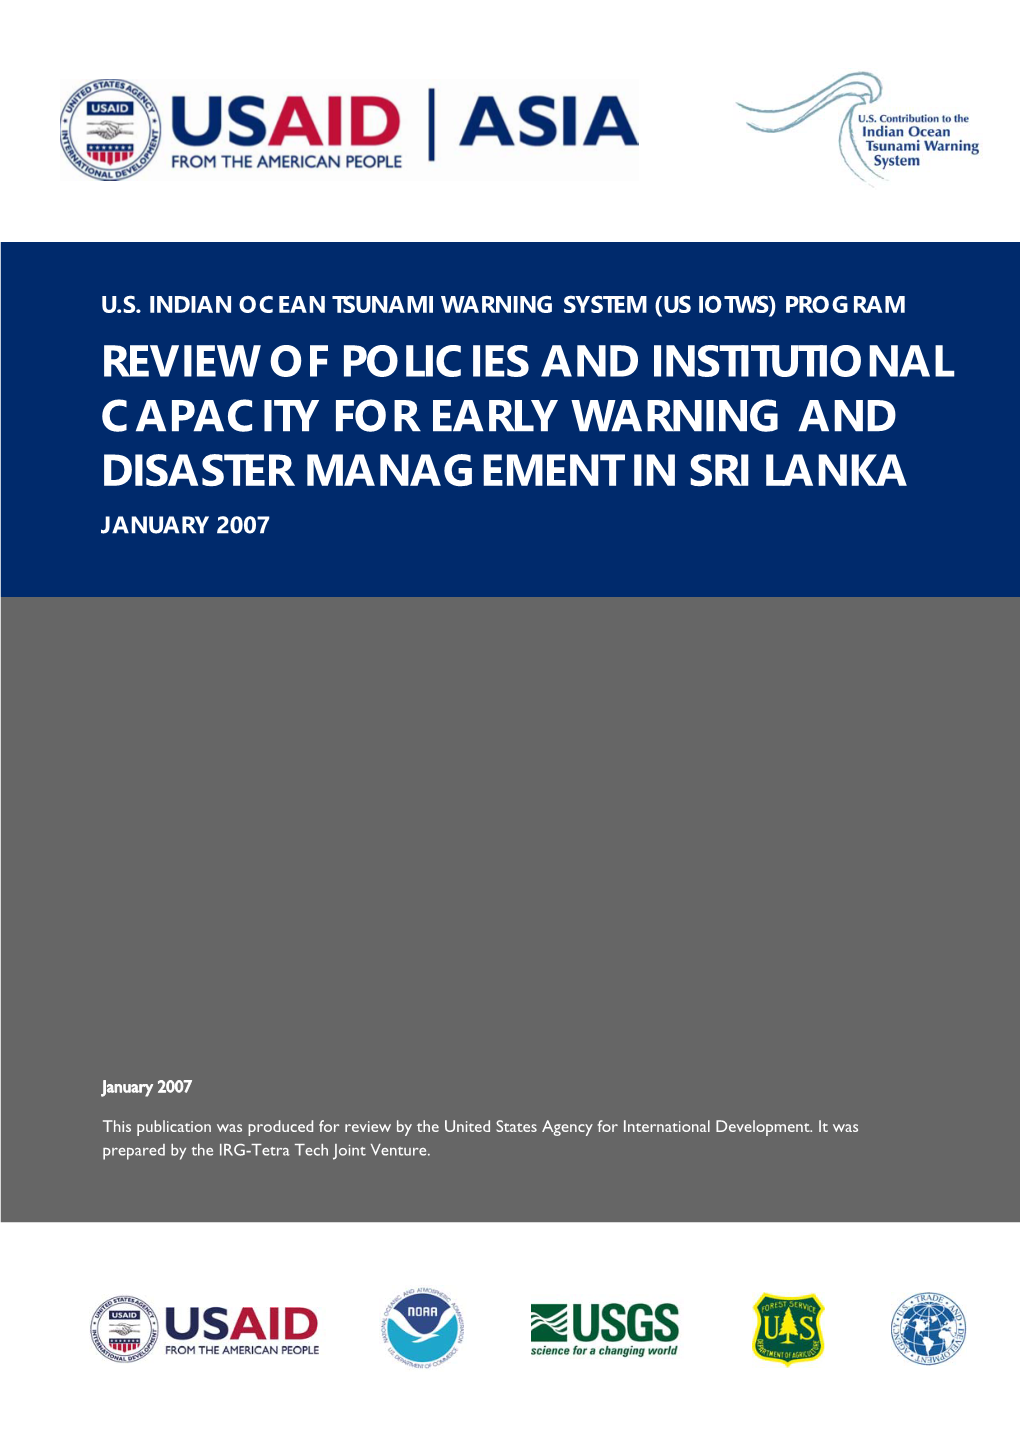 Review of Policies and Institutional Capacity for Early Warning and Disaster Management in Sri Lanka January 2007